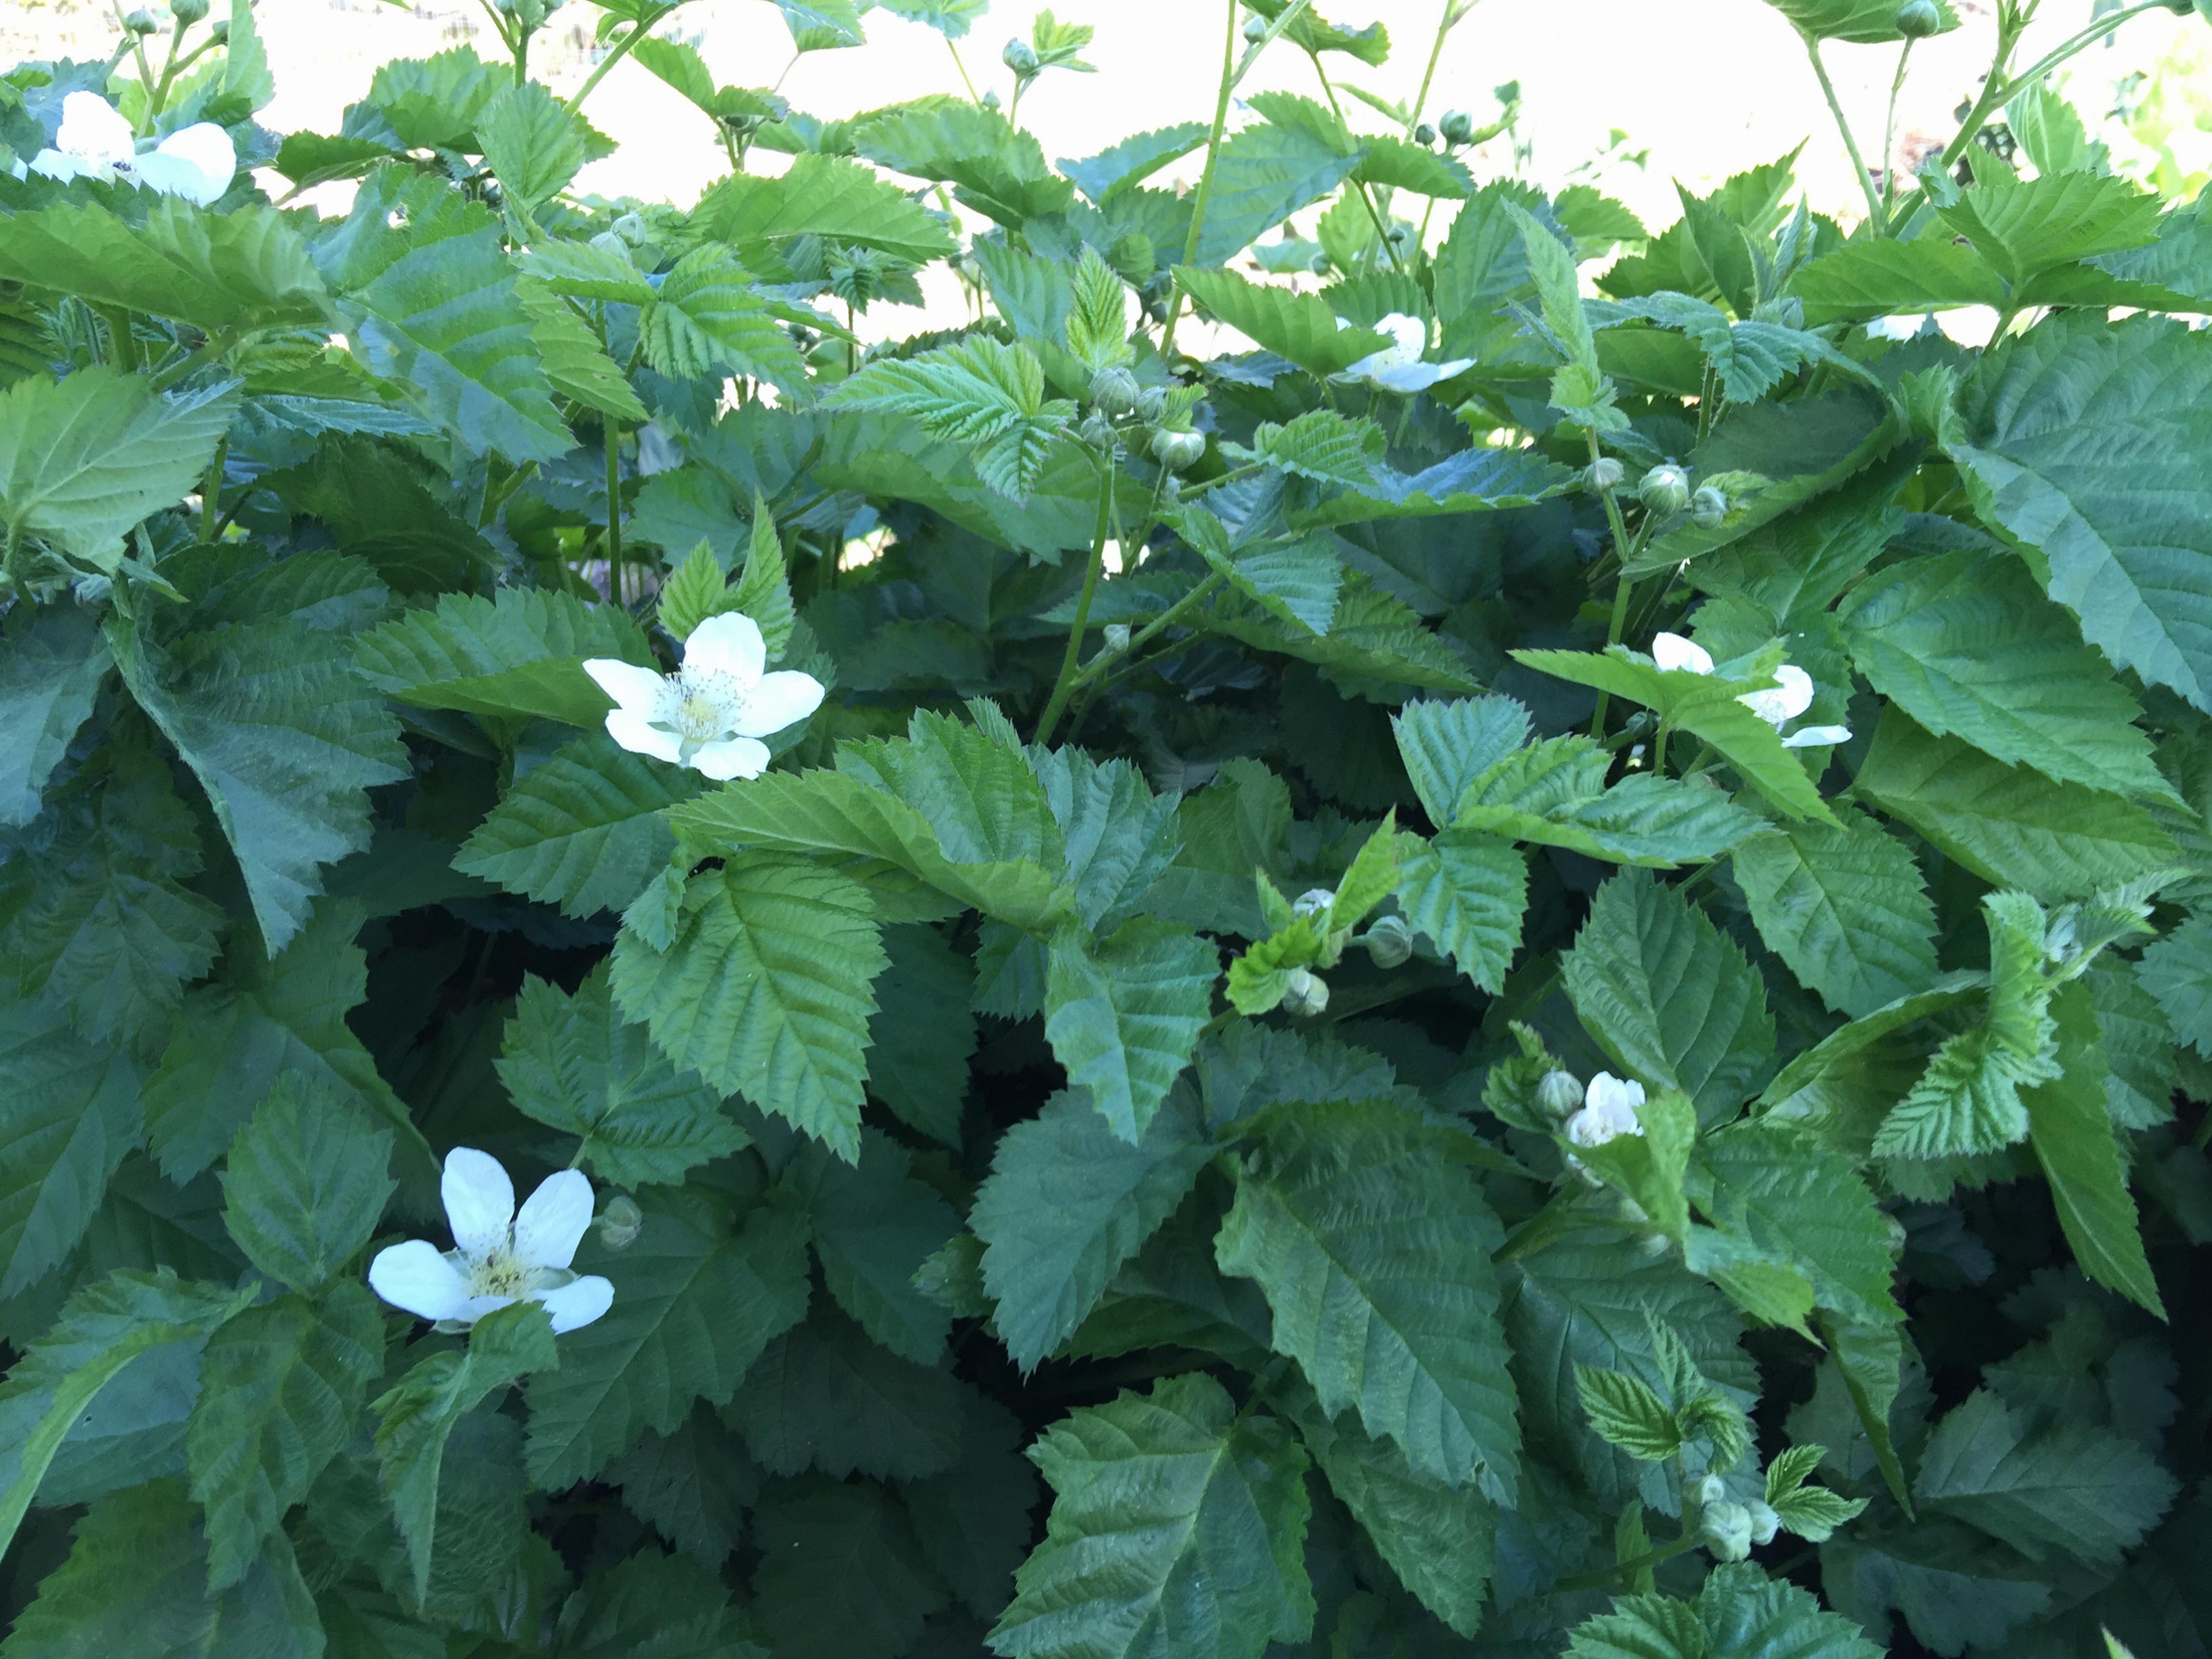 Boysenberries – Bringing a planting back to life